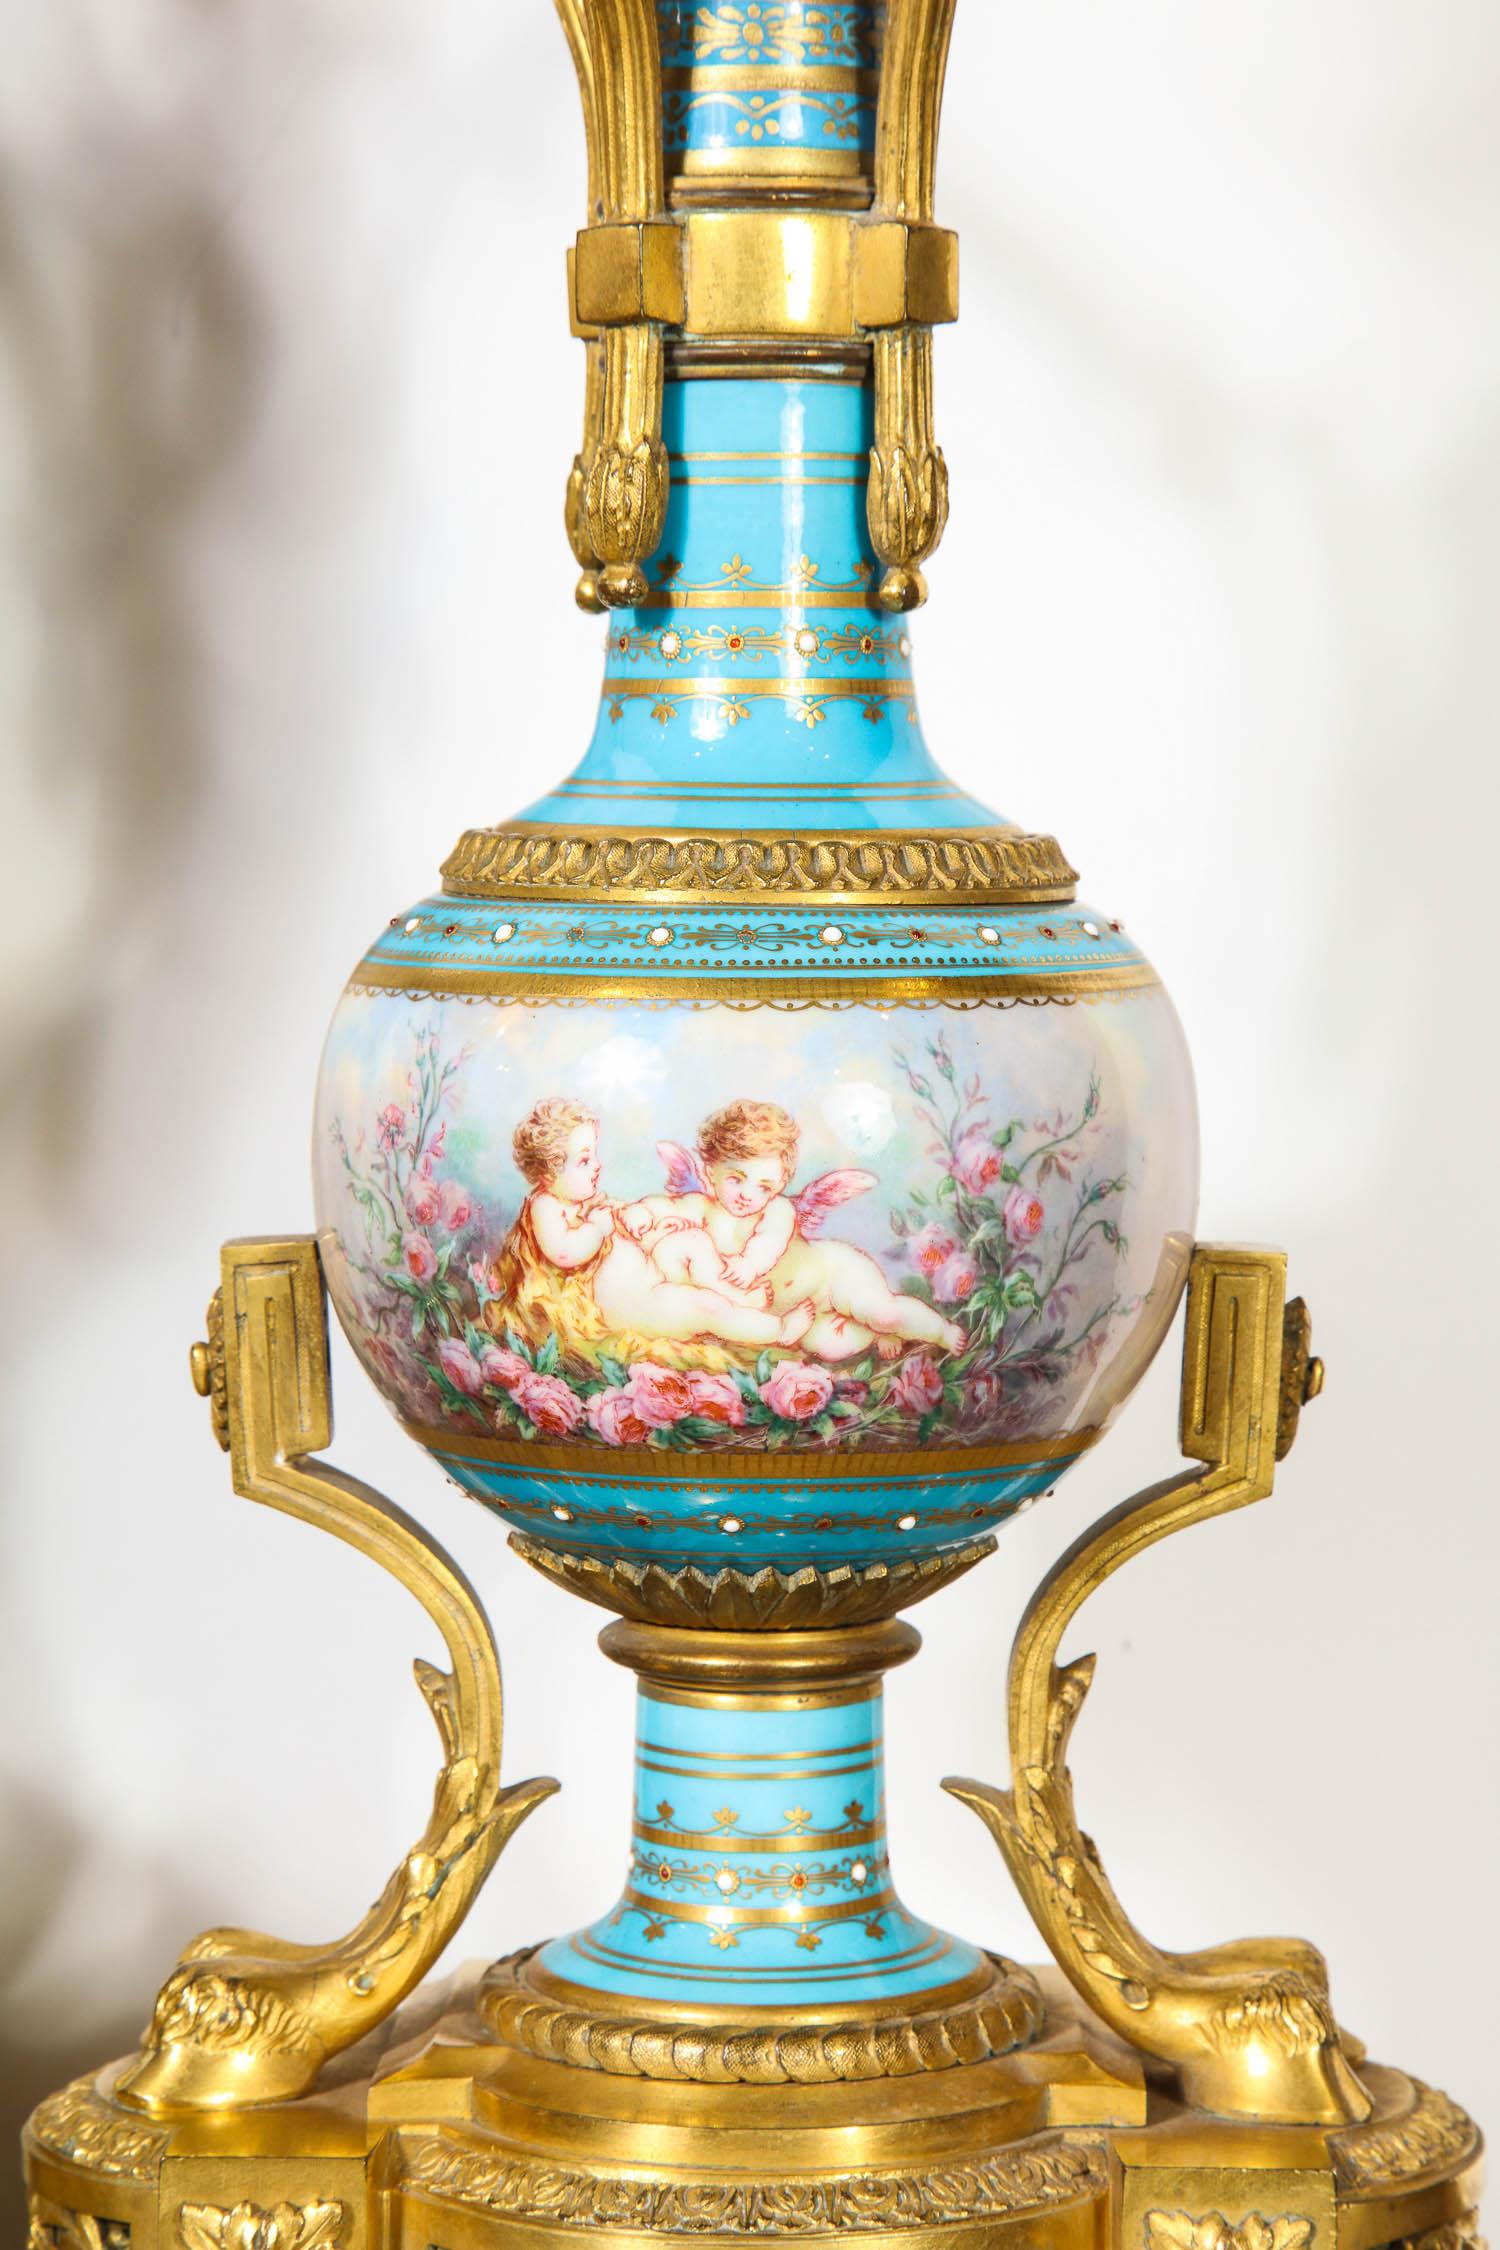 Exceptional French Ormolu-Mounted Turquoise Jeweled Sevres Porcelain Clock Set For Sale 2